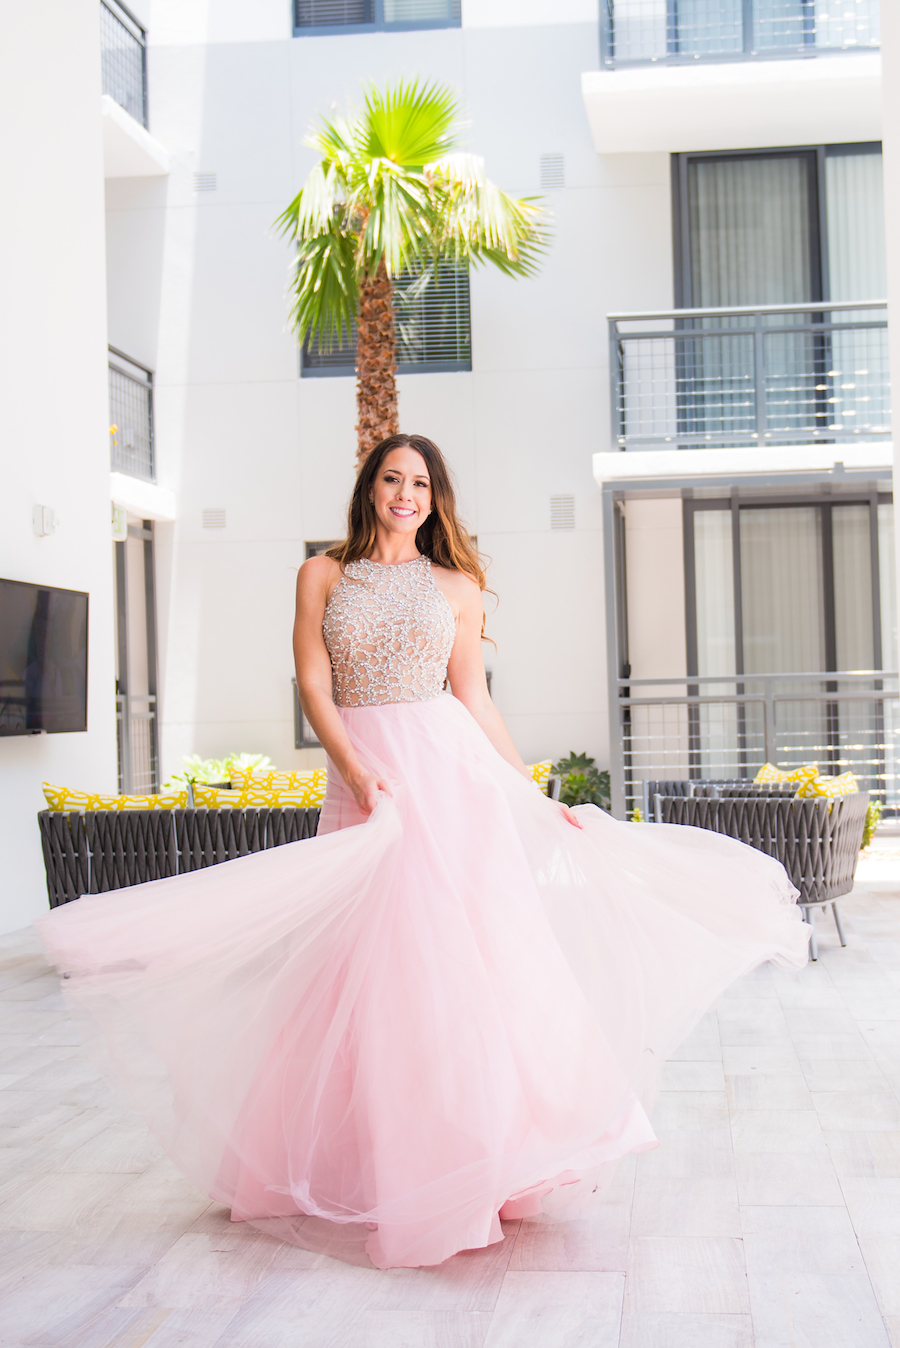 Pink Birthday Party Dress from Lending Luxury | Modern Colorful Birthday Party Inspiration and Decor | Tampa Bay Portrait and Wedding Photographer Kera Photography | Hair and Makeup Michele Renee the Studio